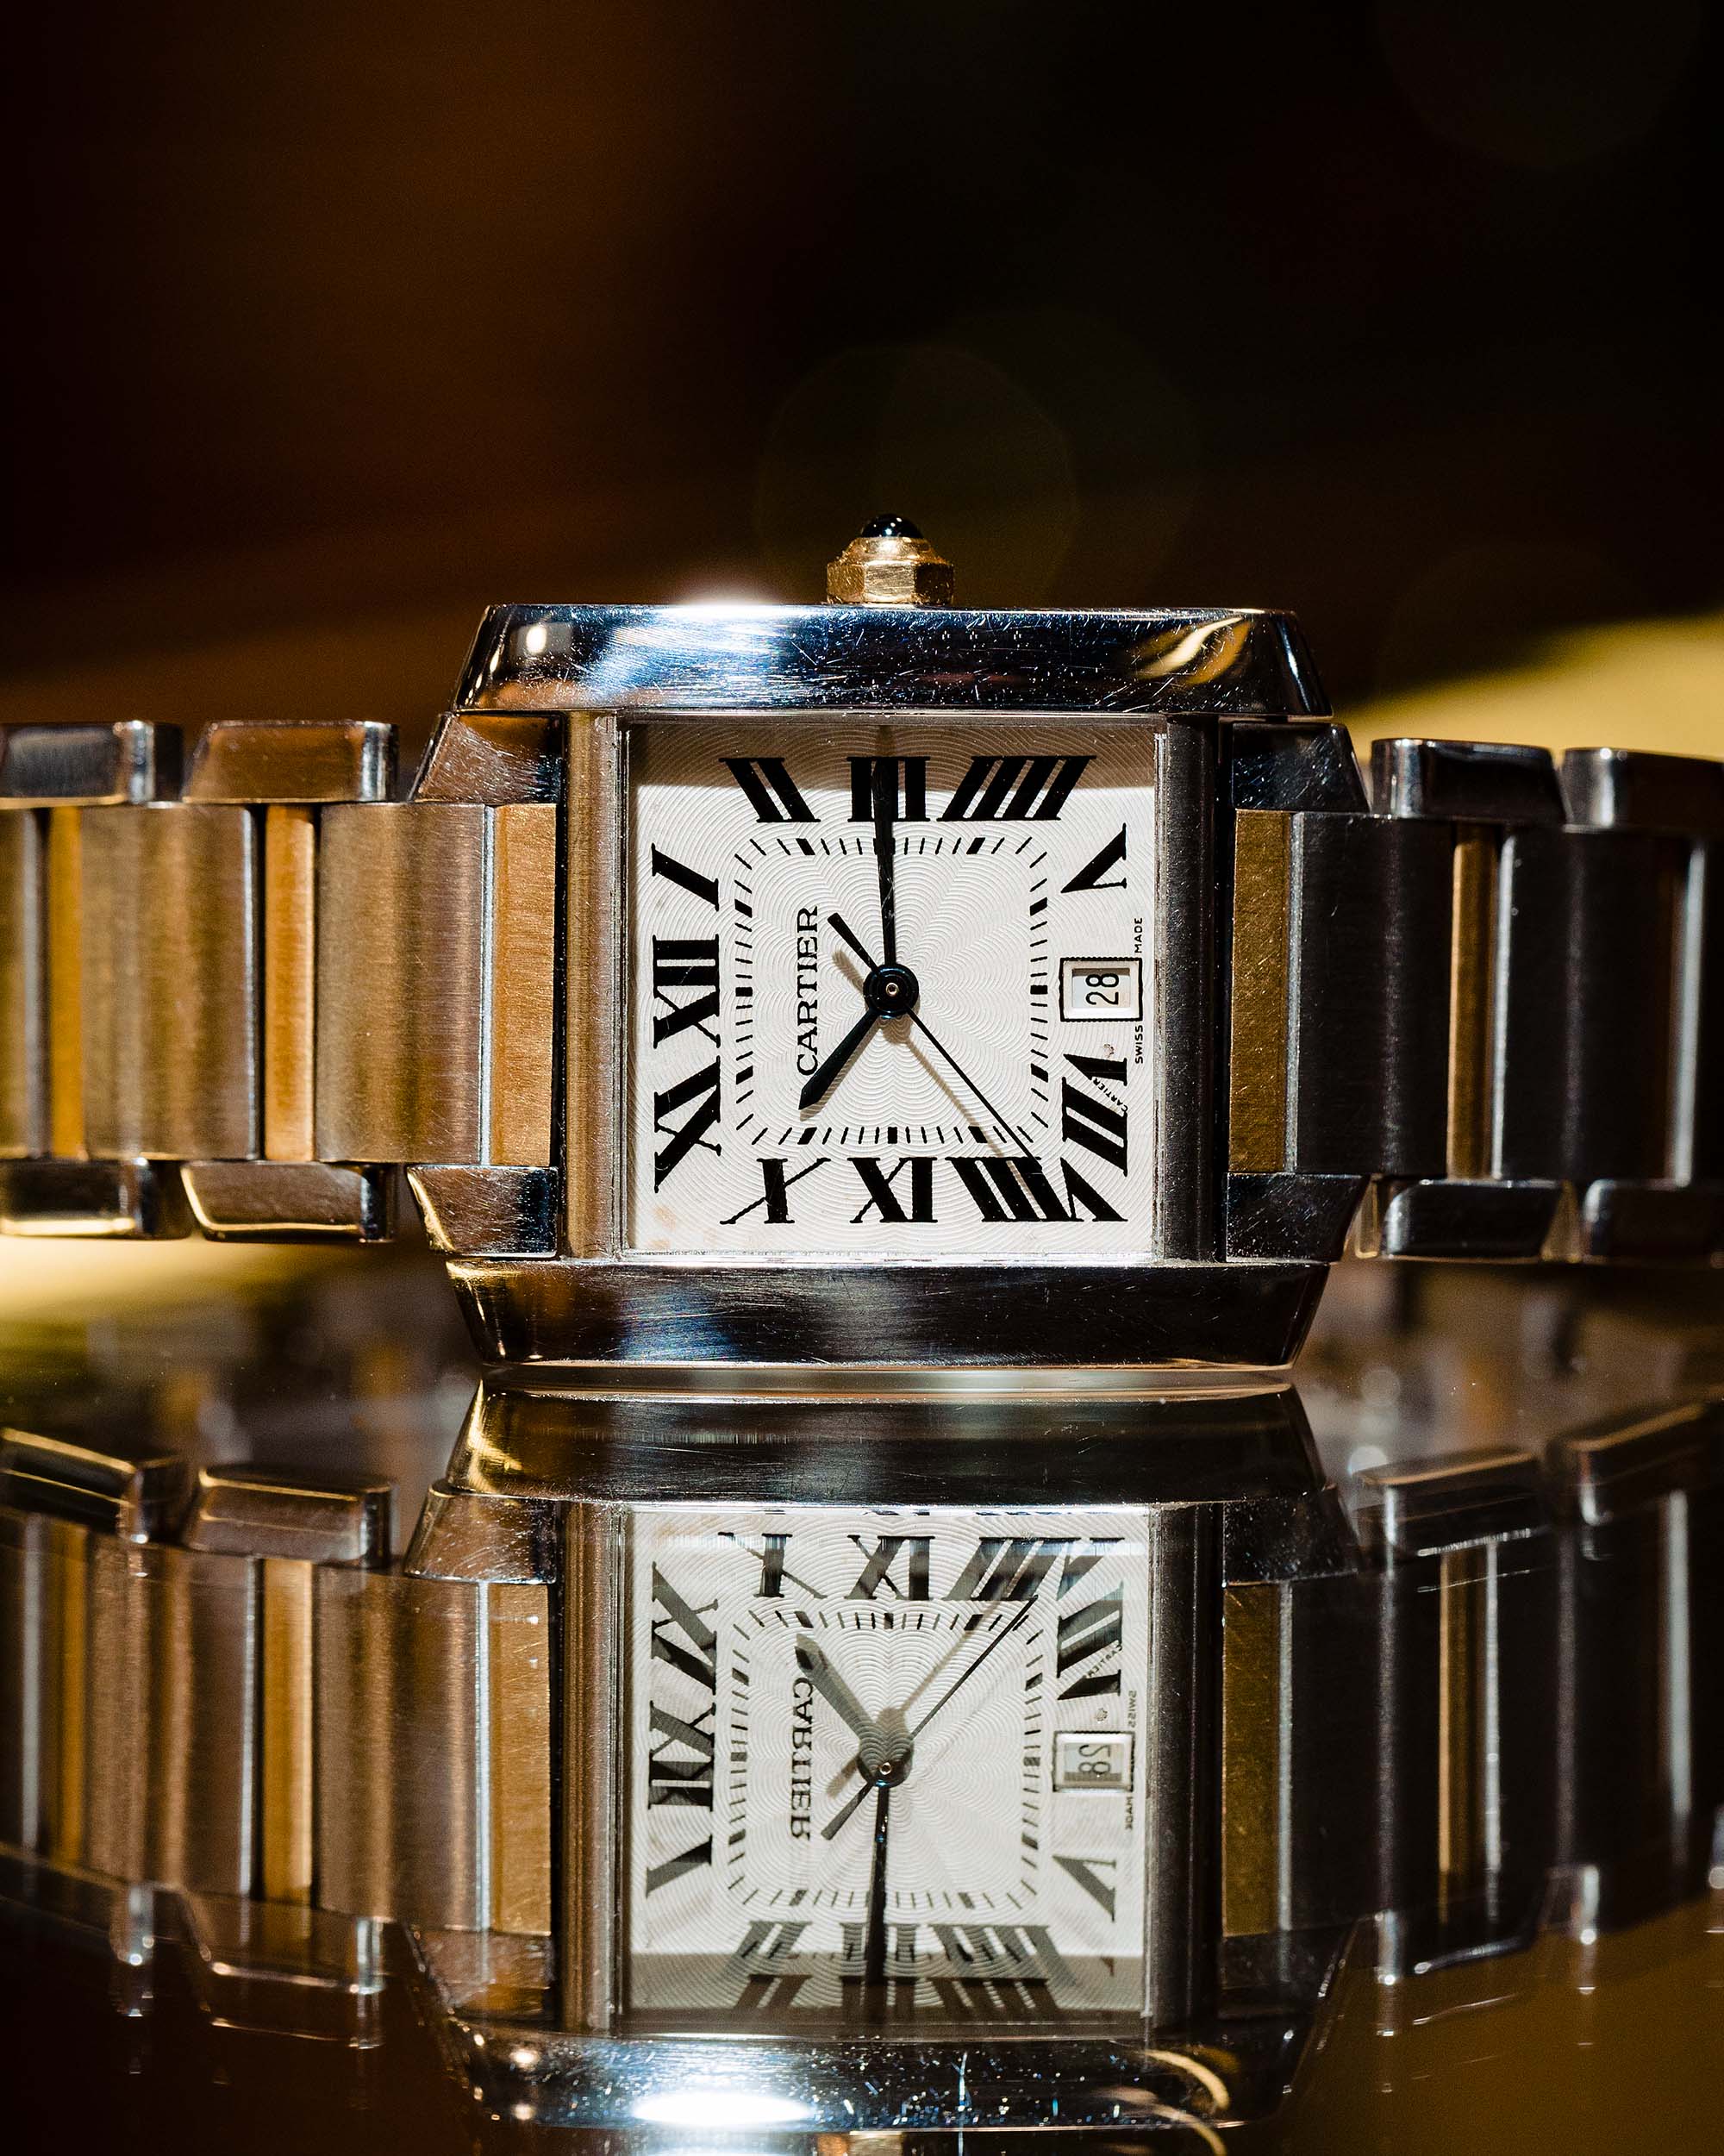 Cartier Tank Francaise Ref. # 2302 Automatic Stainless Steel for $3,795  for sale from a Trusted Seller on Chrono24